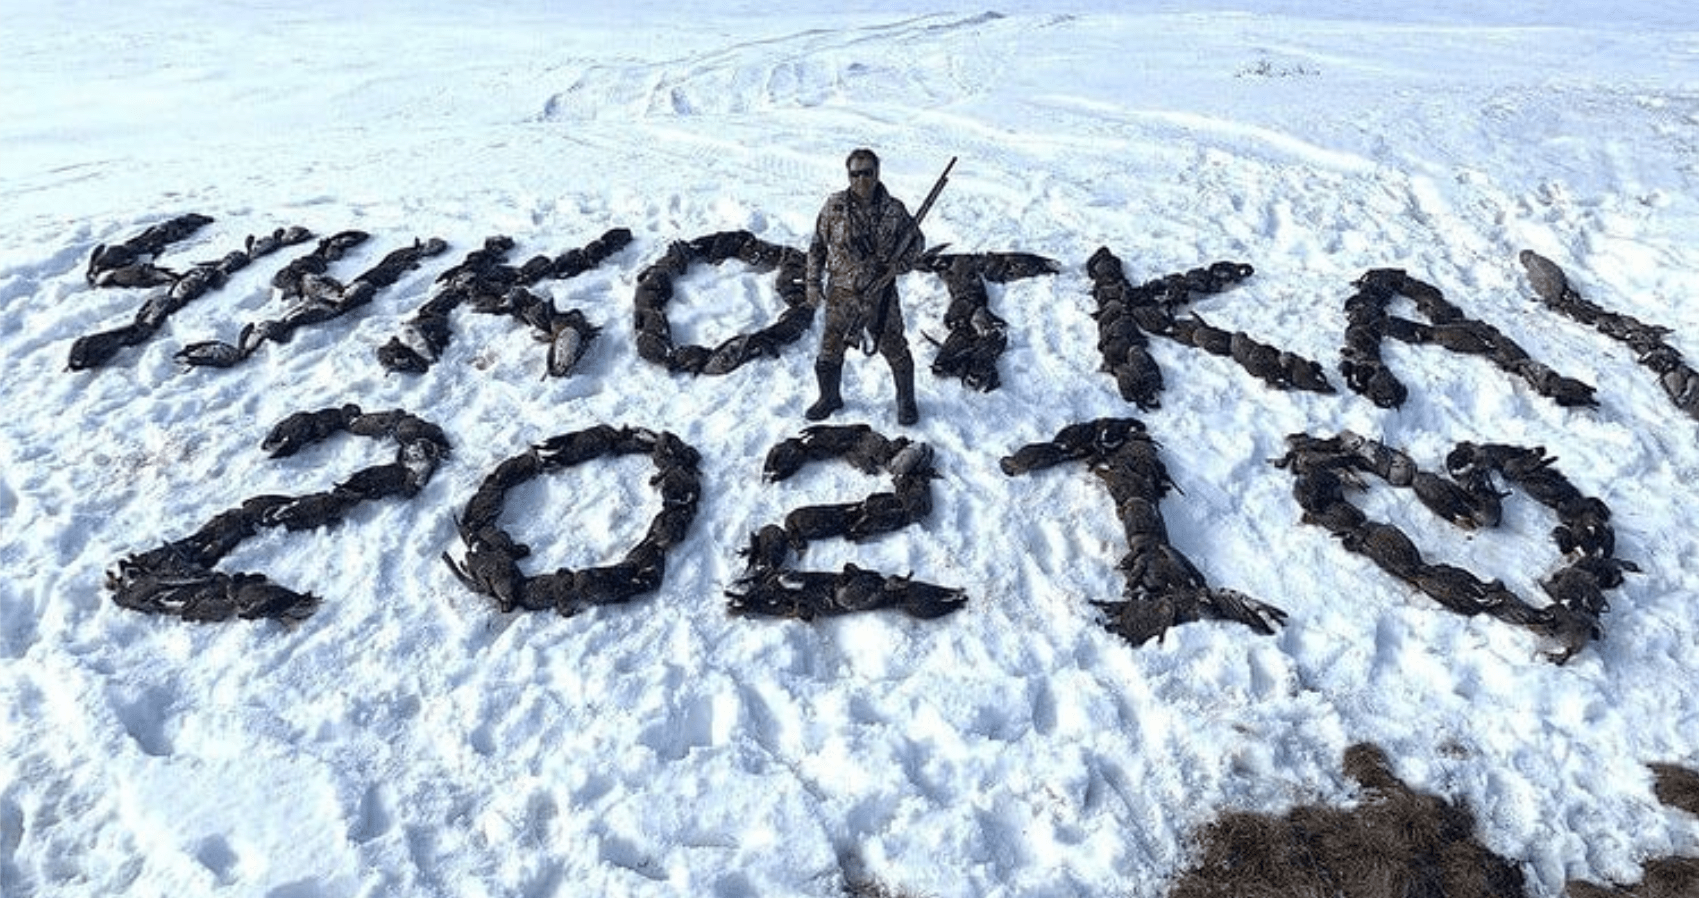 Photo: Aleksandr Kramarenko holding a hunting rifle and standing in the middle of a snowy field where what appeared to be almost 200 dead wild birds were arranged to spell out the words "Chukotka 2021". Credit: @hunting_in_siberia/Instagram via RadioFreeEurope